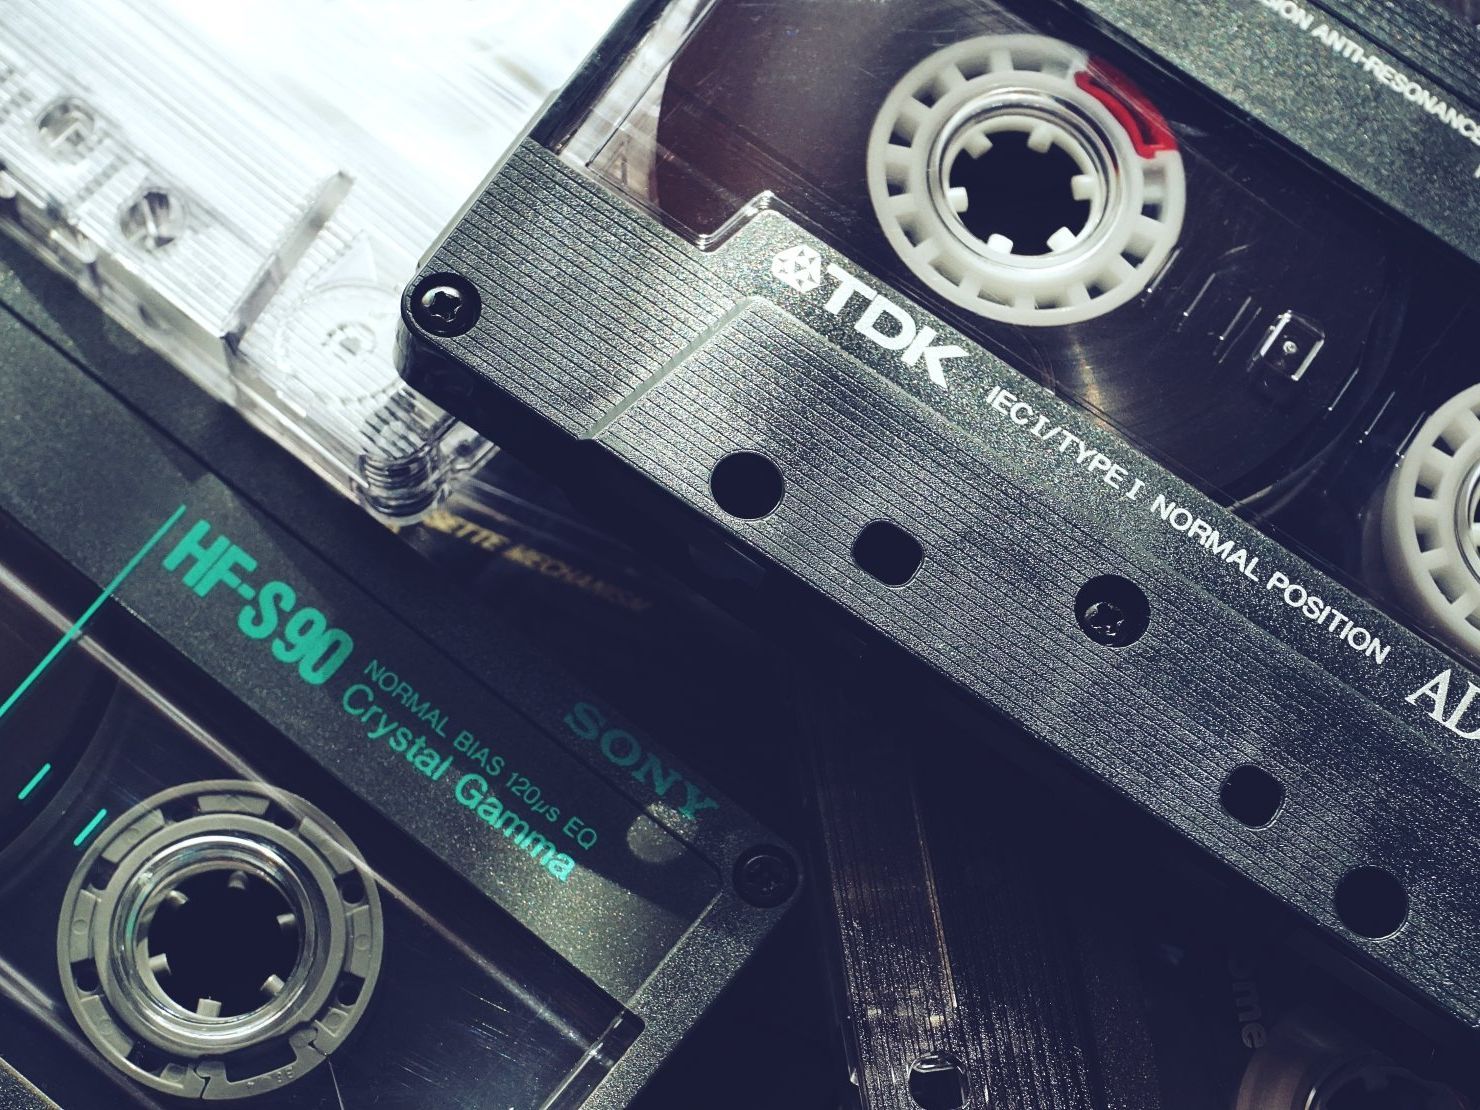 a tdk cassette tape sits next to a sony cassette tape